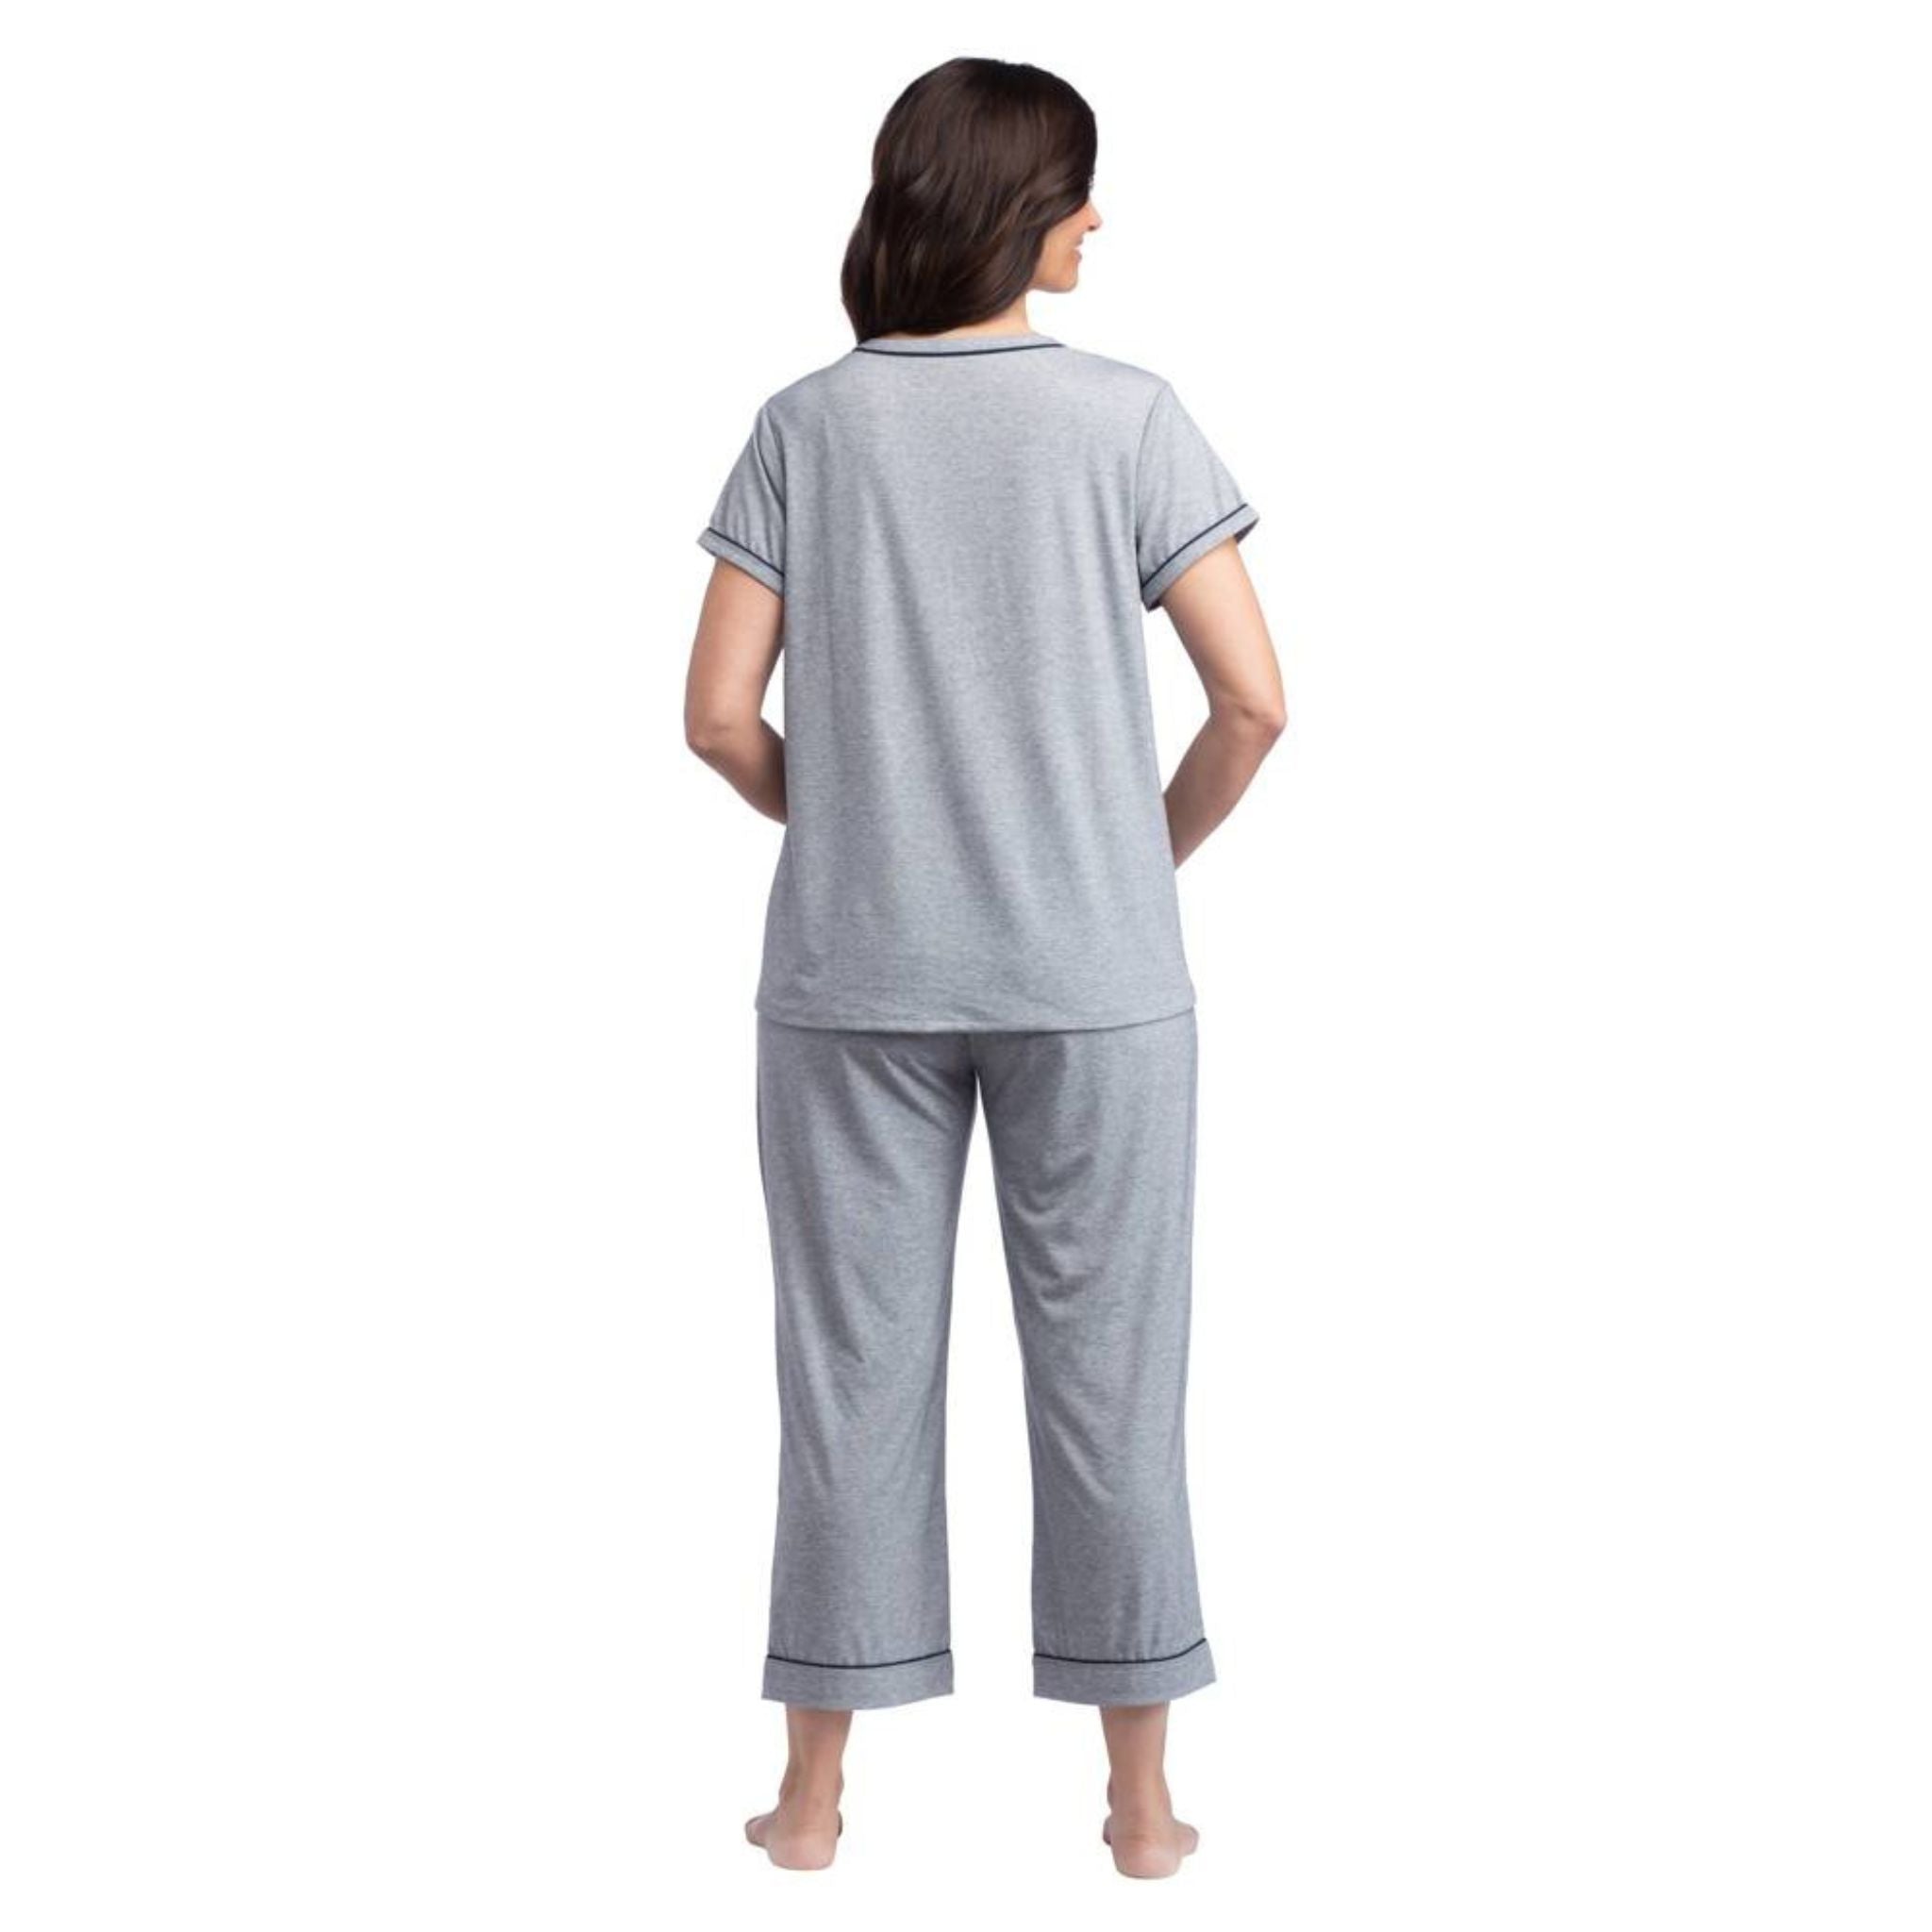 Meet your new 24/7 loungewear and sleepwear favorite — Softies Cali Short-Sleeve Capri PJ Set with Colored Trim. This is the perfect pair for those stay-in-your-PJs days. Ultra-inviting and exceptionally lightweight, you’ll feel cozy and stylish in this set, thanks to contrast trim accents that decorate the shirt and pants. An elastic waistband with an adjustable drawstring tie allows for a customizable fit.